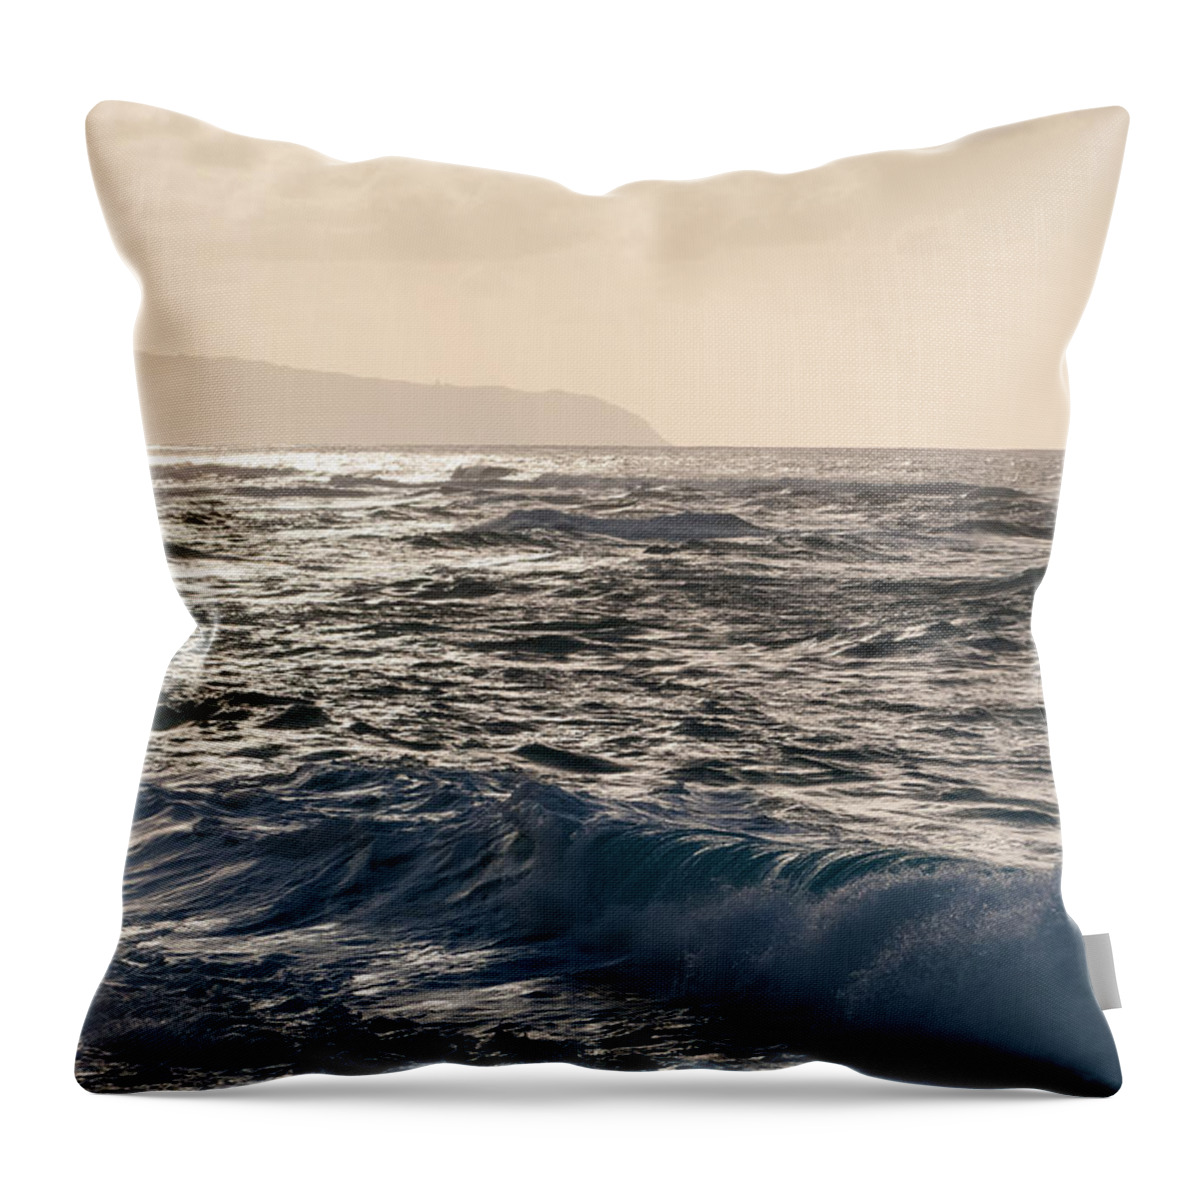 Hawaii Throw Pillow featuring the photograph North Shore Waves by Lars Lentz